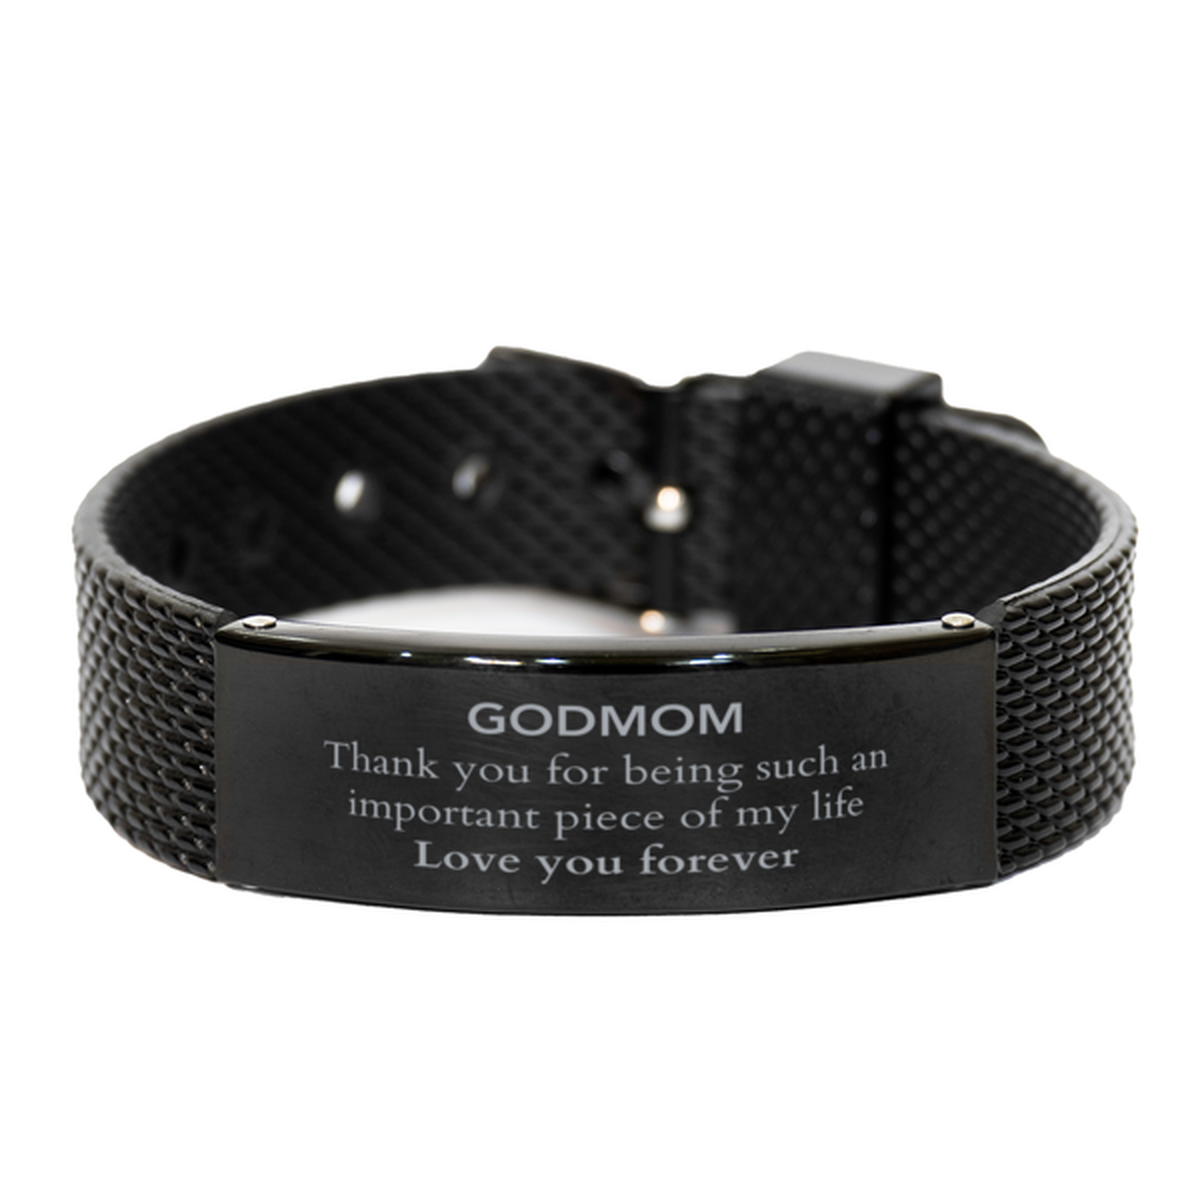 Appropriate Godmom Black Shark Mesh Bracelet Epic Birthday Gifts for Godmom Thank you for being such an important piece of my life Godmom Christmas Mothers Fathers Day